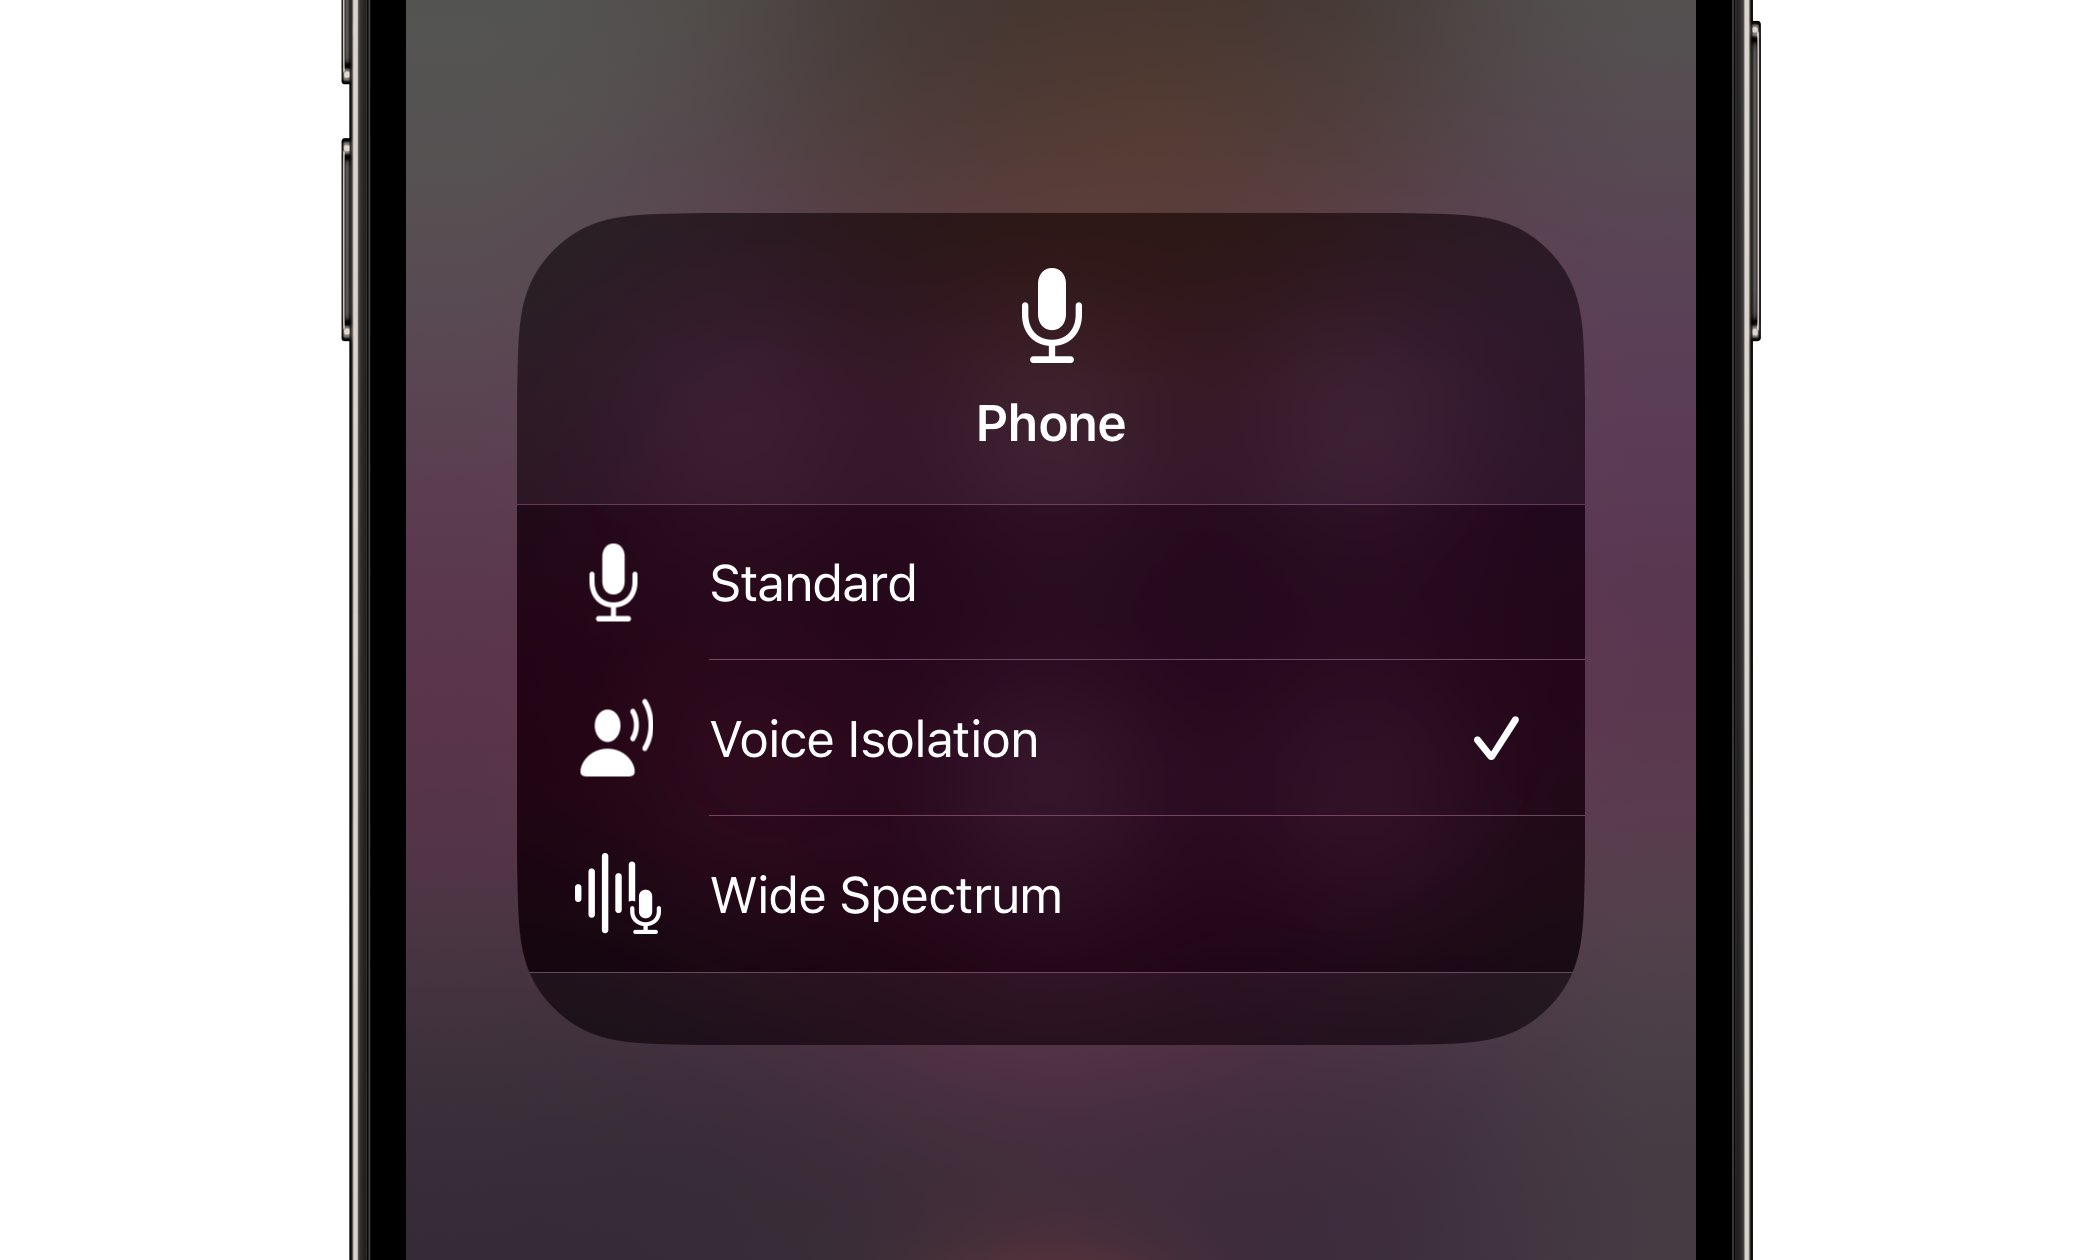 iOS 16.4 Control Center on iPhone showing Mic Mode options.